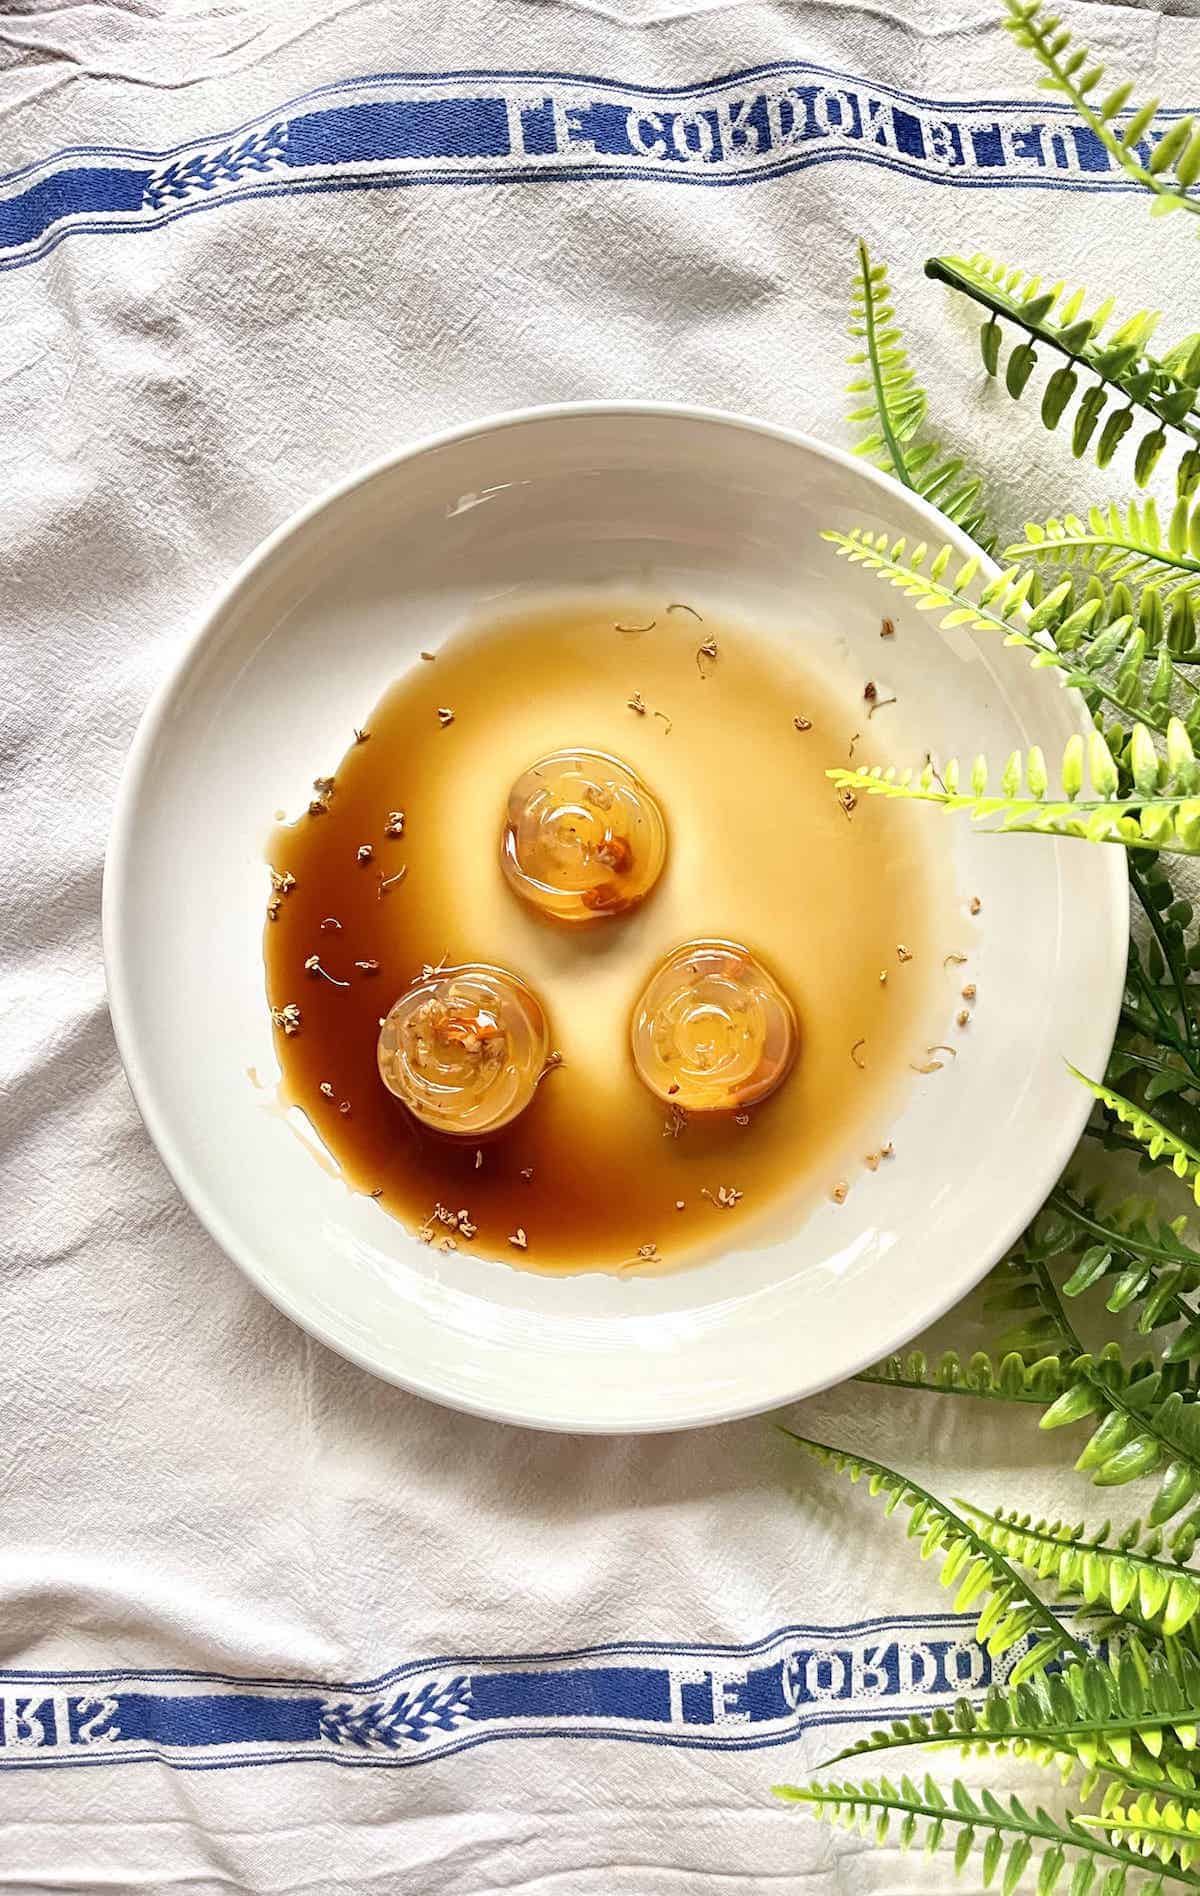 3 osmanthus jellies in brown sugar syrup on a white plate.